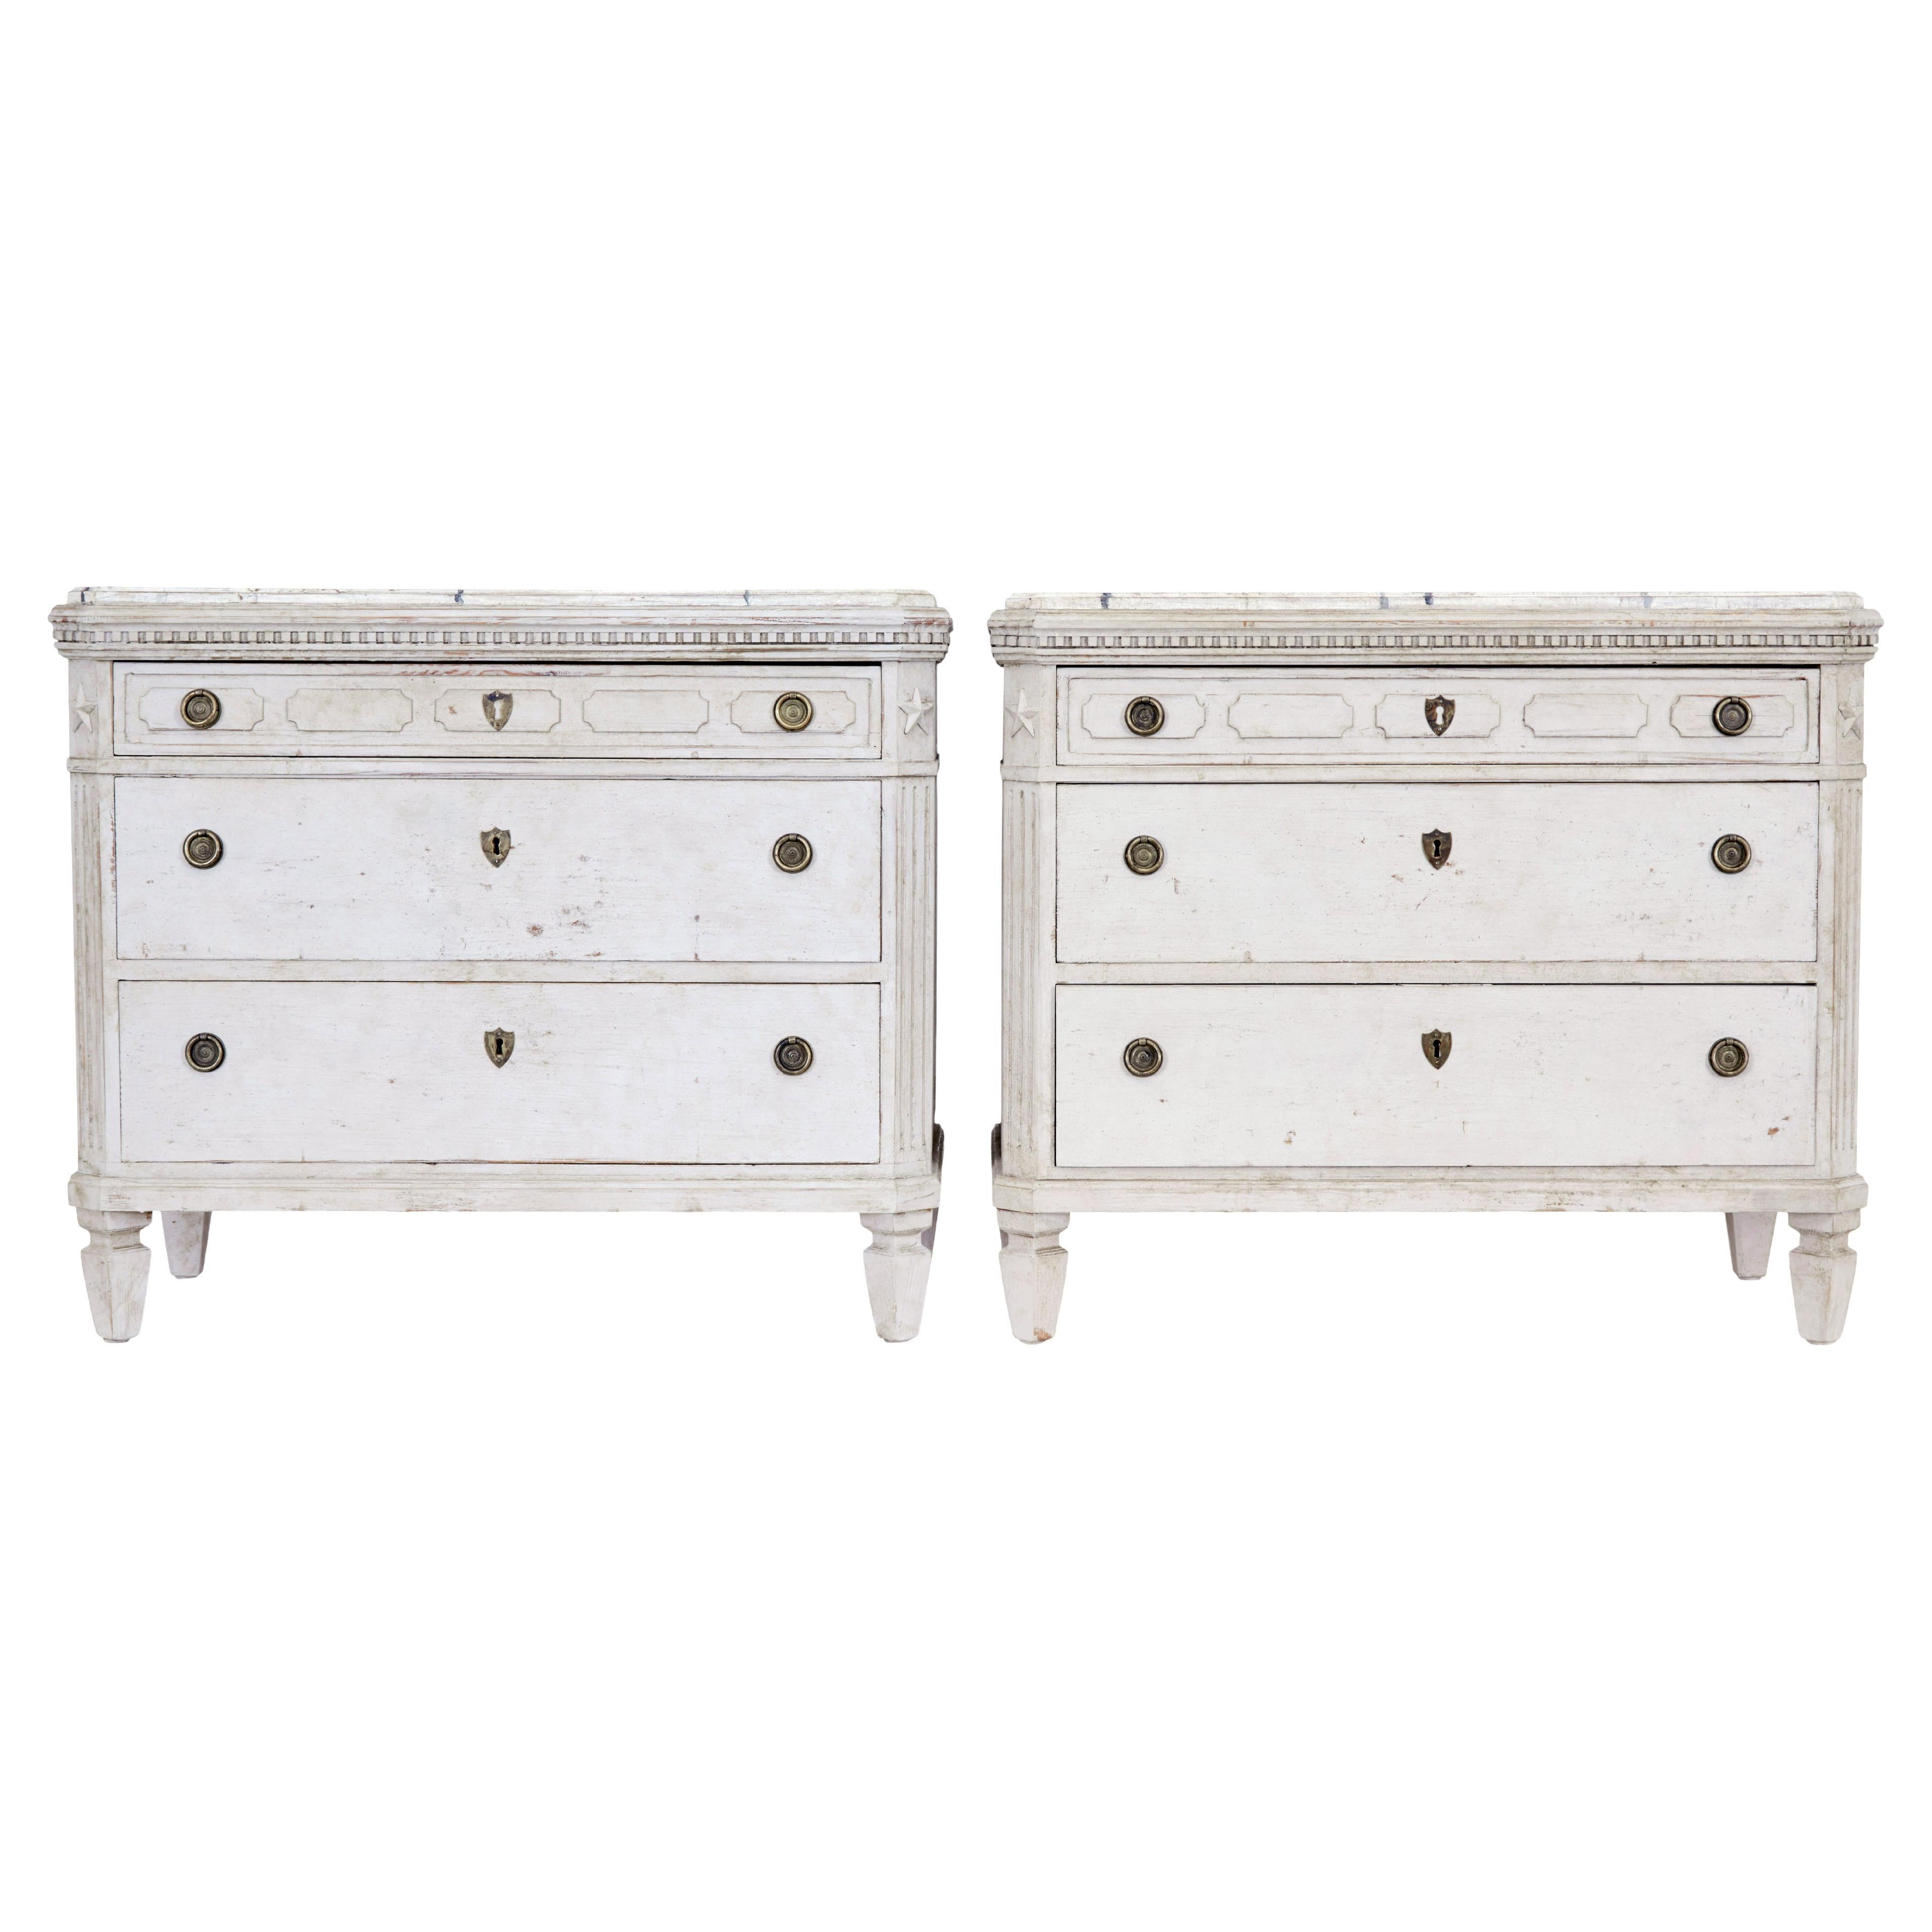 Pair of 19th century Swedish painted faux marble top chest of drawers